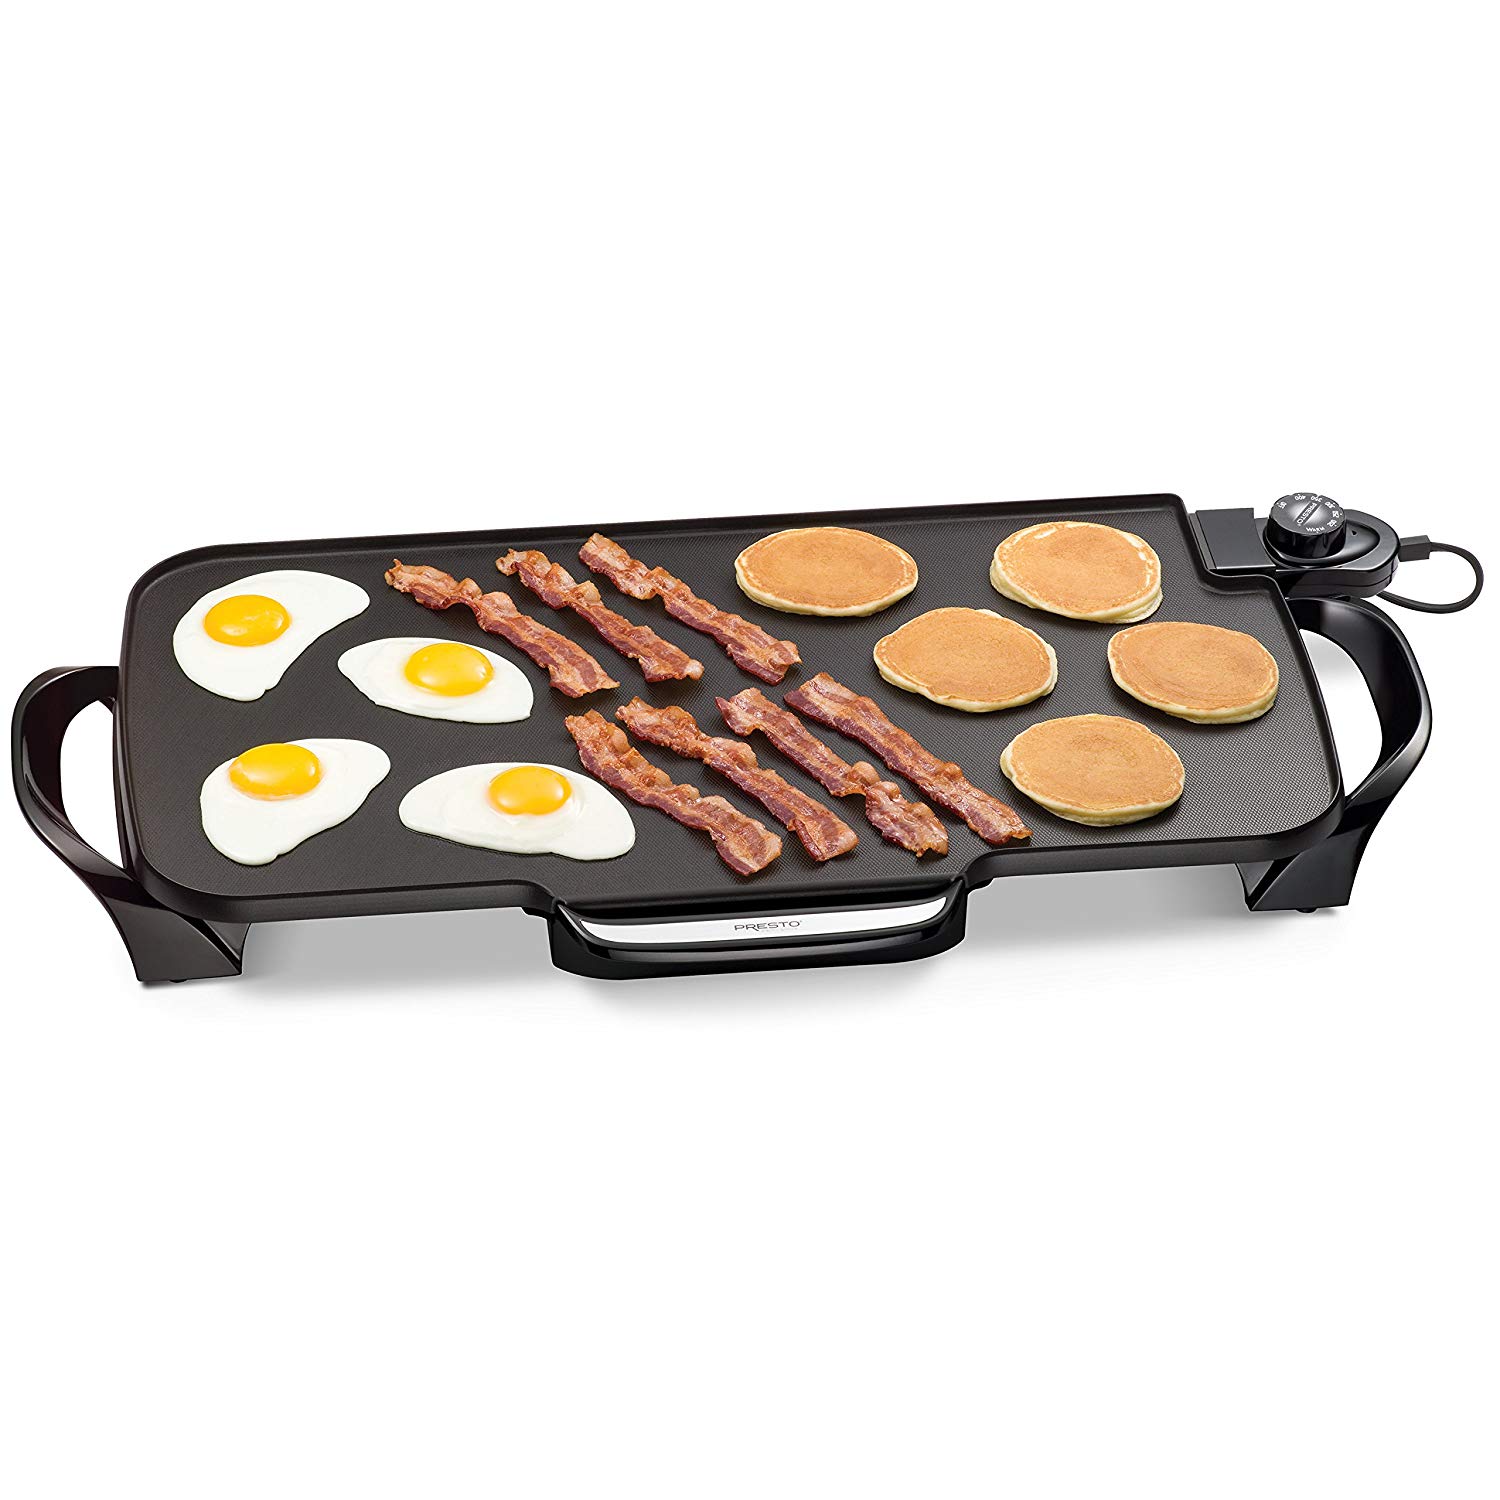 Presto 22-inch Electric Griddle with removable handles - image 1 of 5